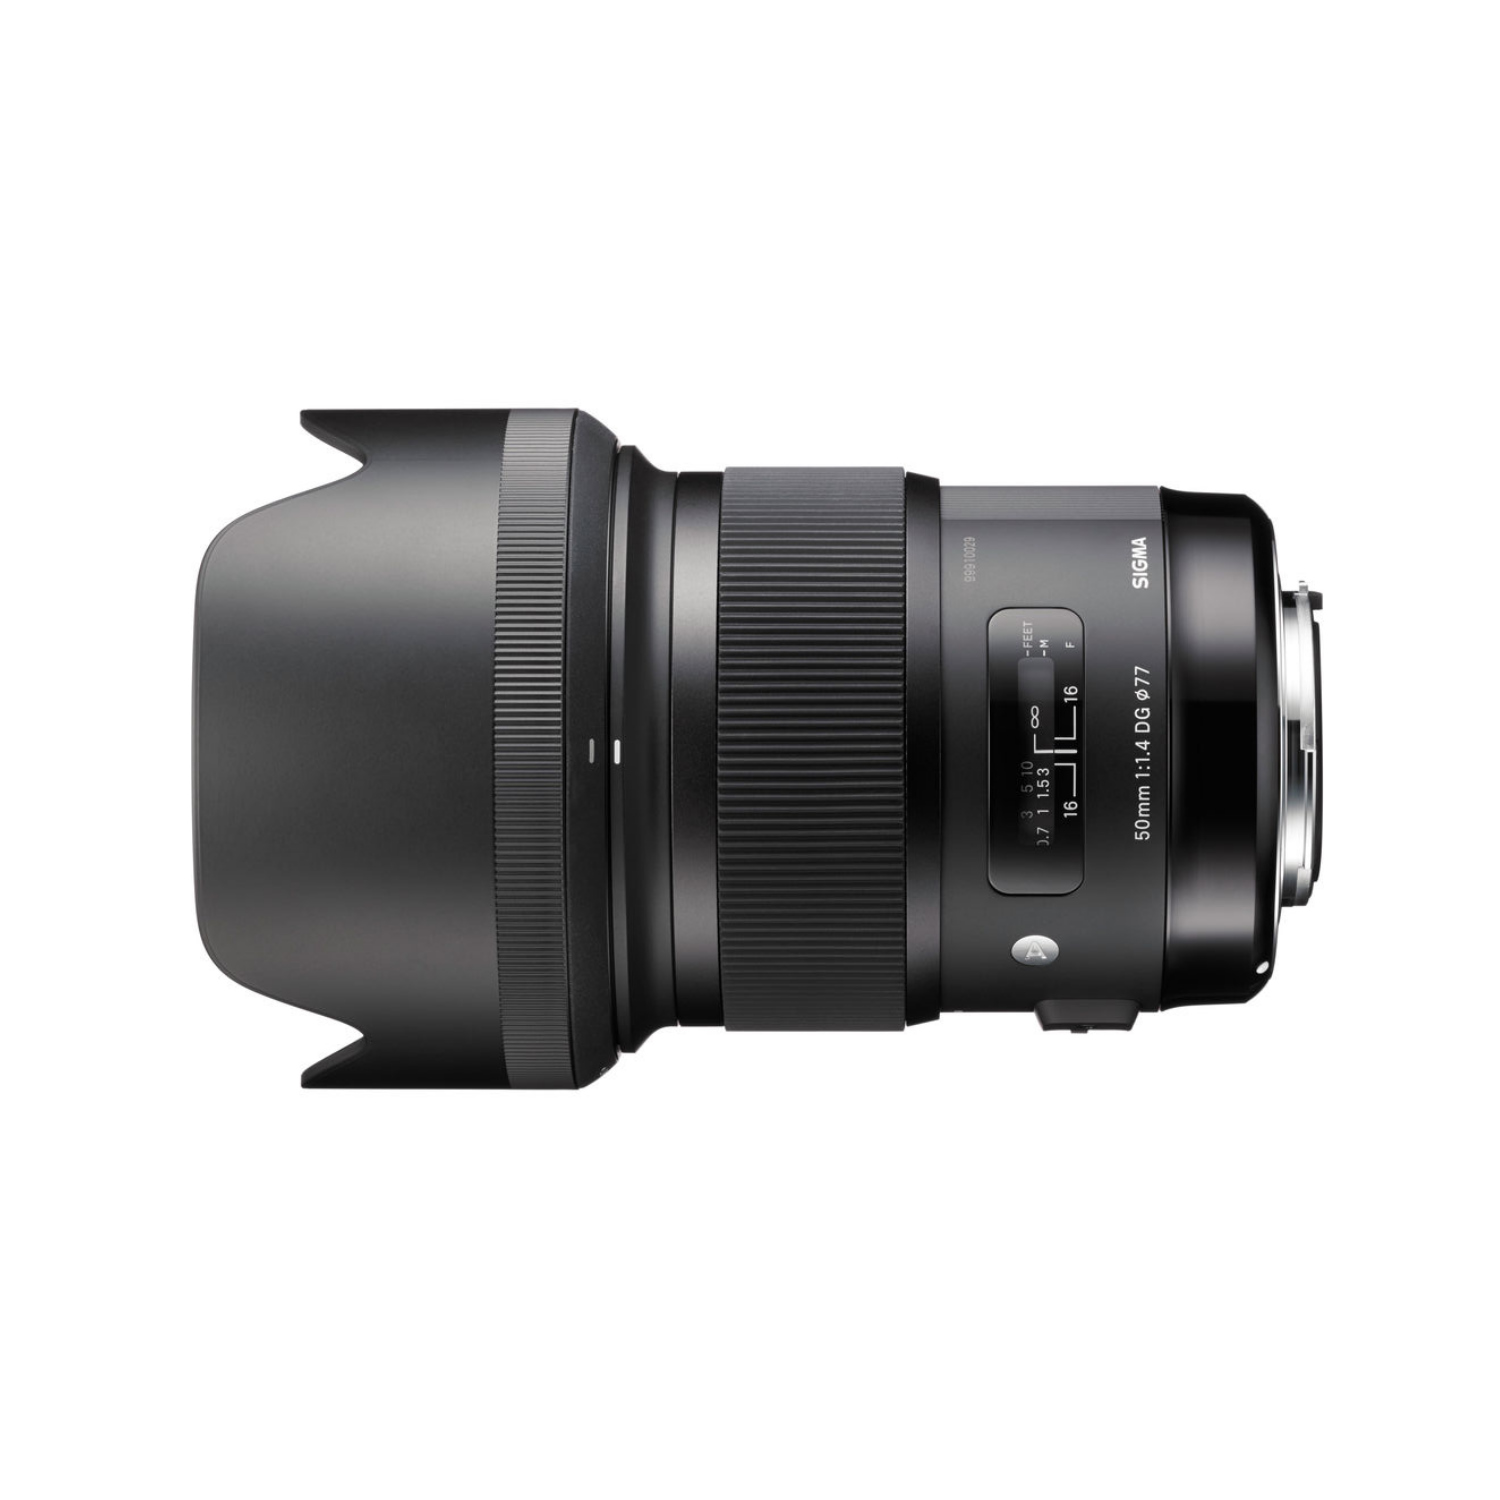 Sigma 50mm f/1.4 DG HSM Art Lens for Sony A-Mount